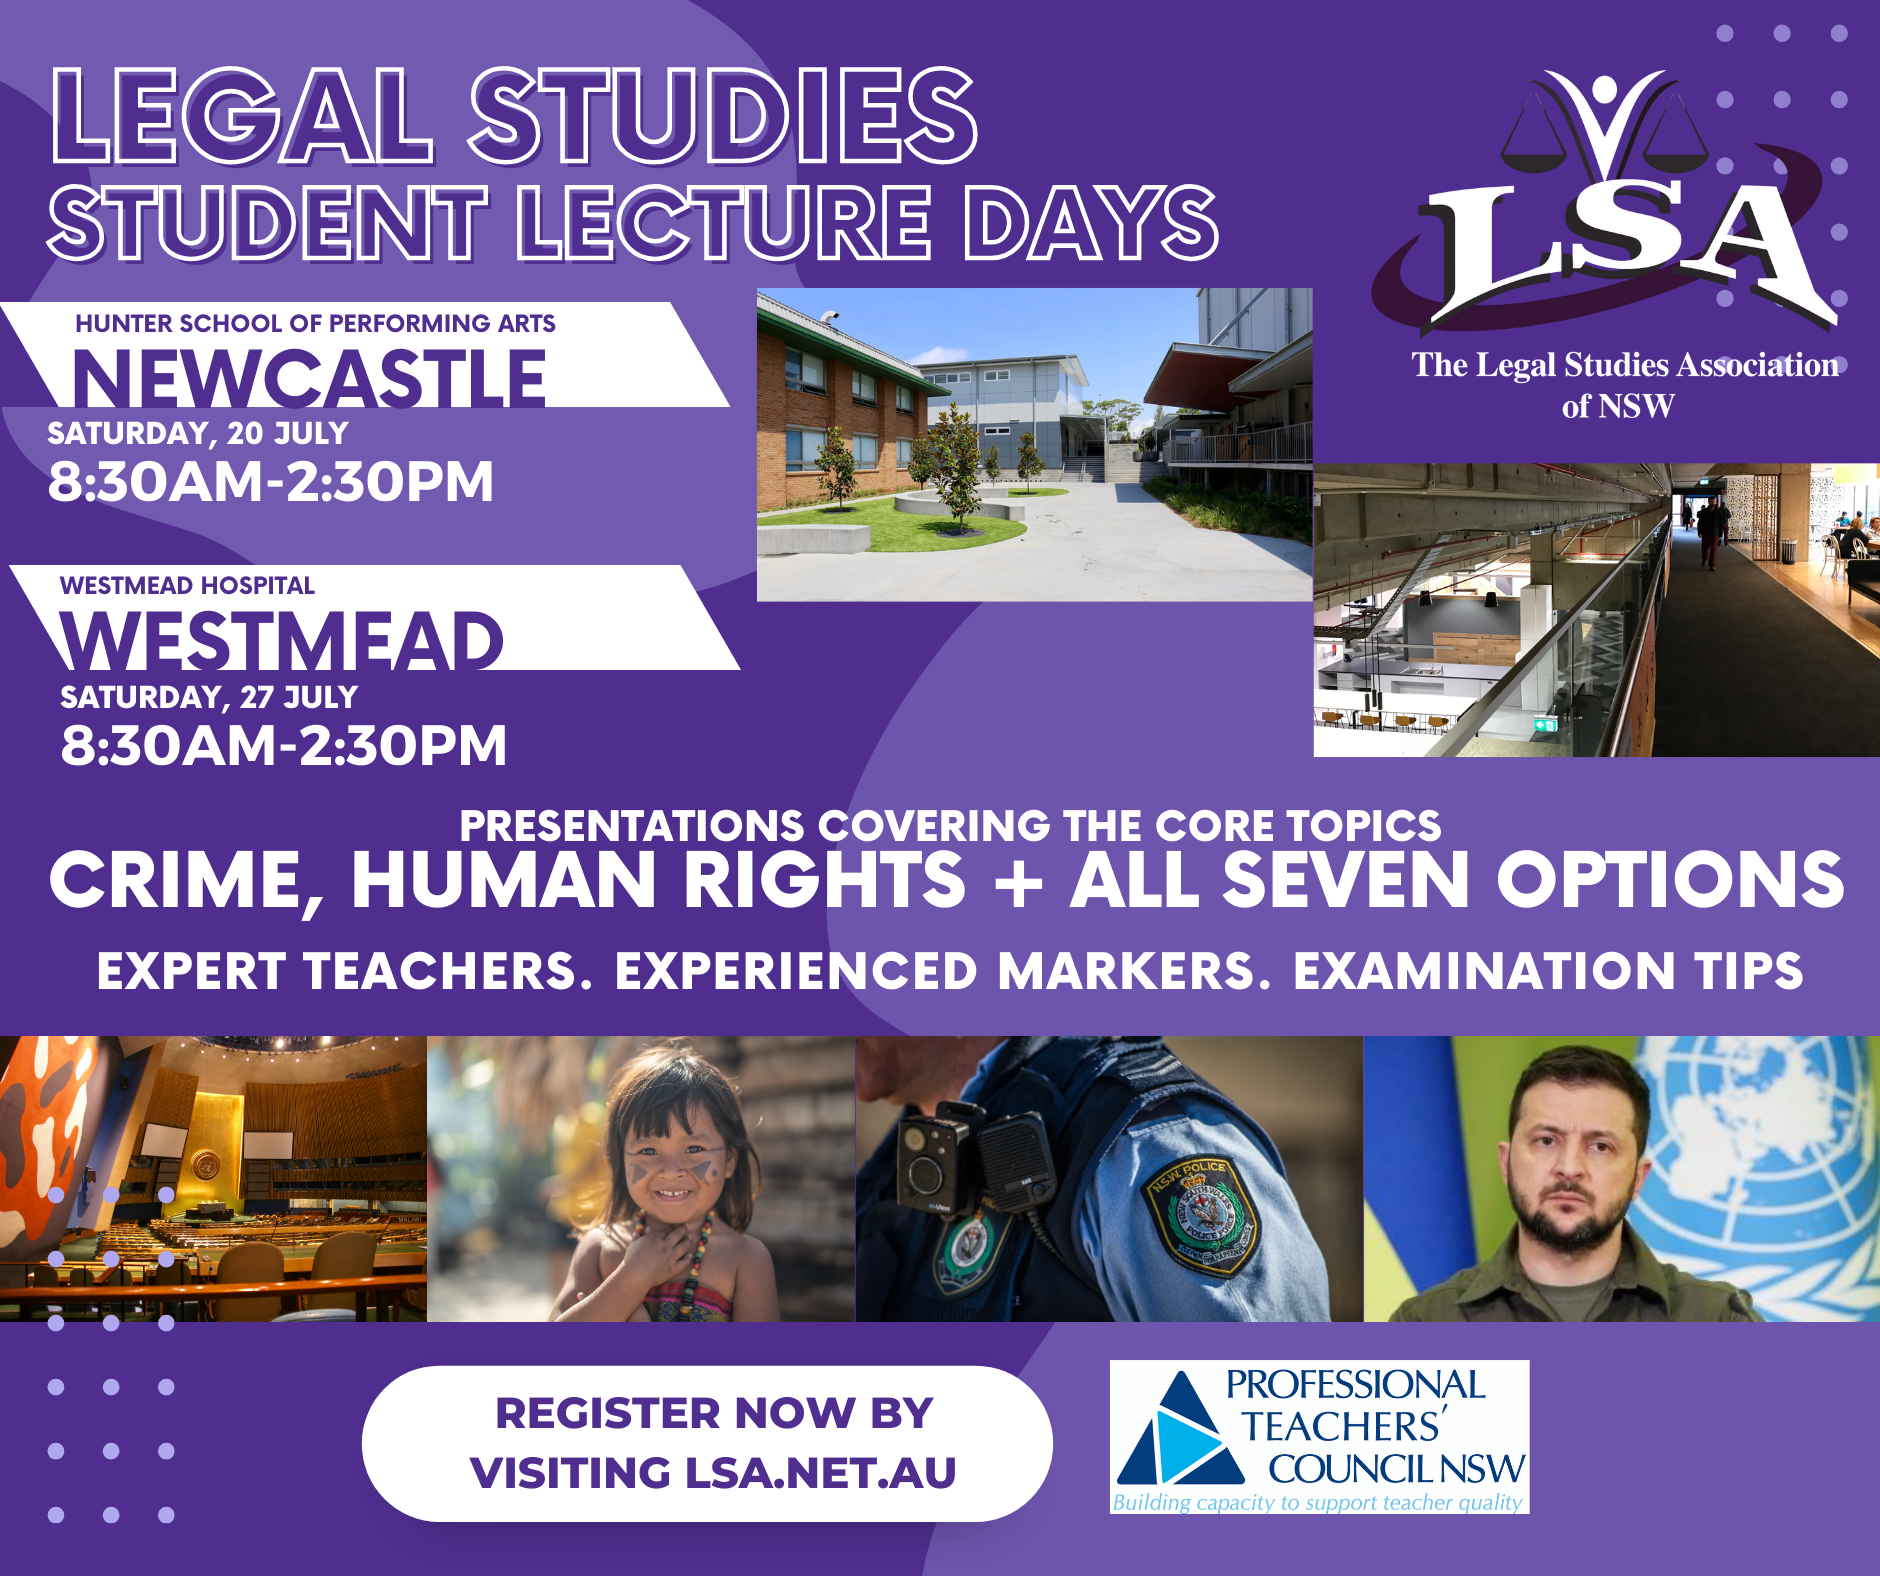  STUDENT LECTURES - REGISTRATIONS CLOSING SOON!